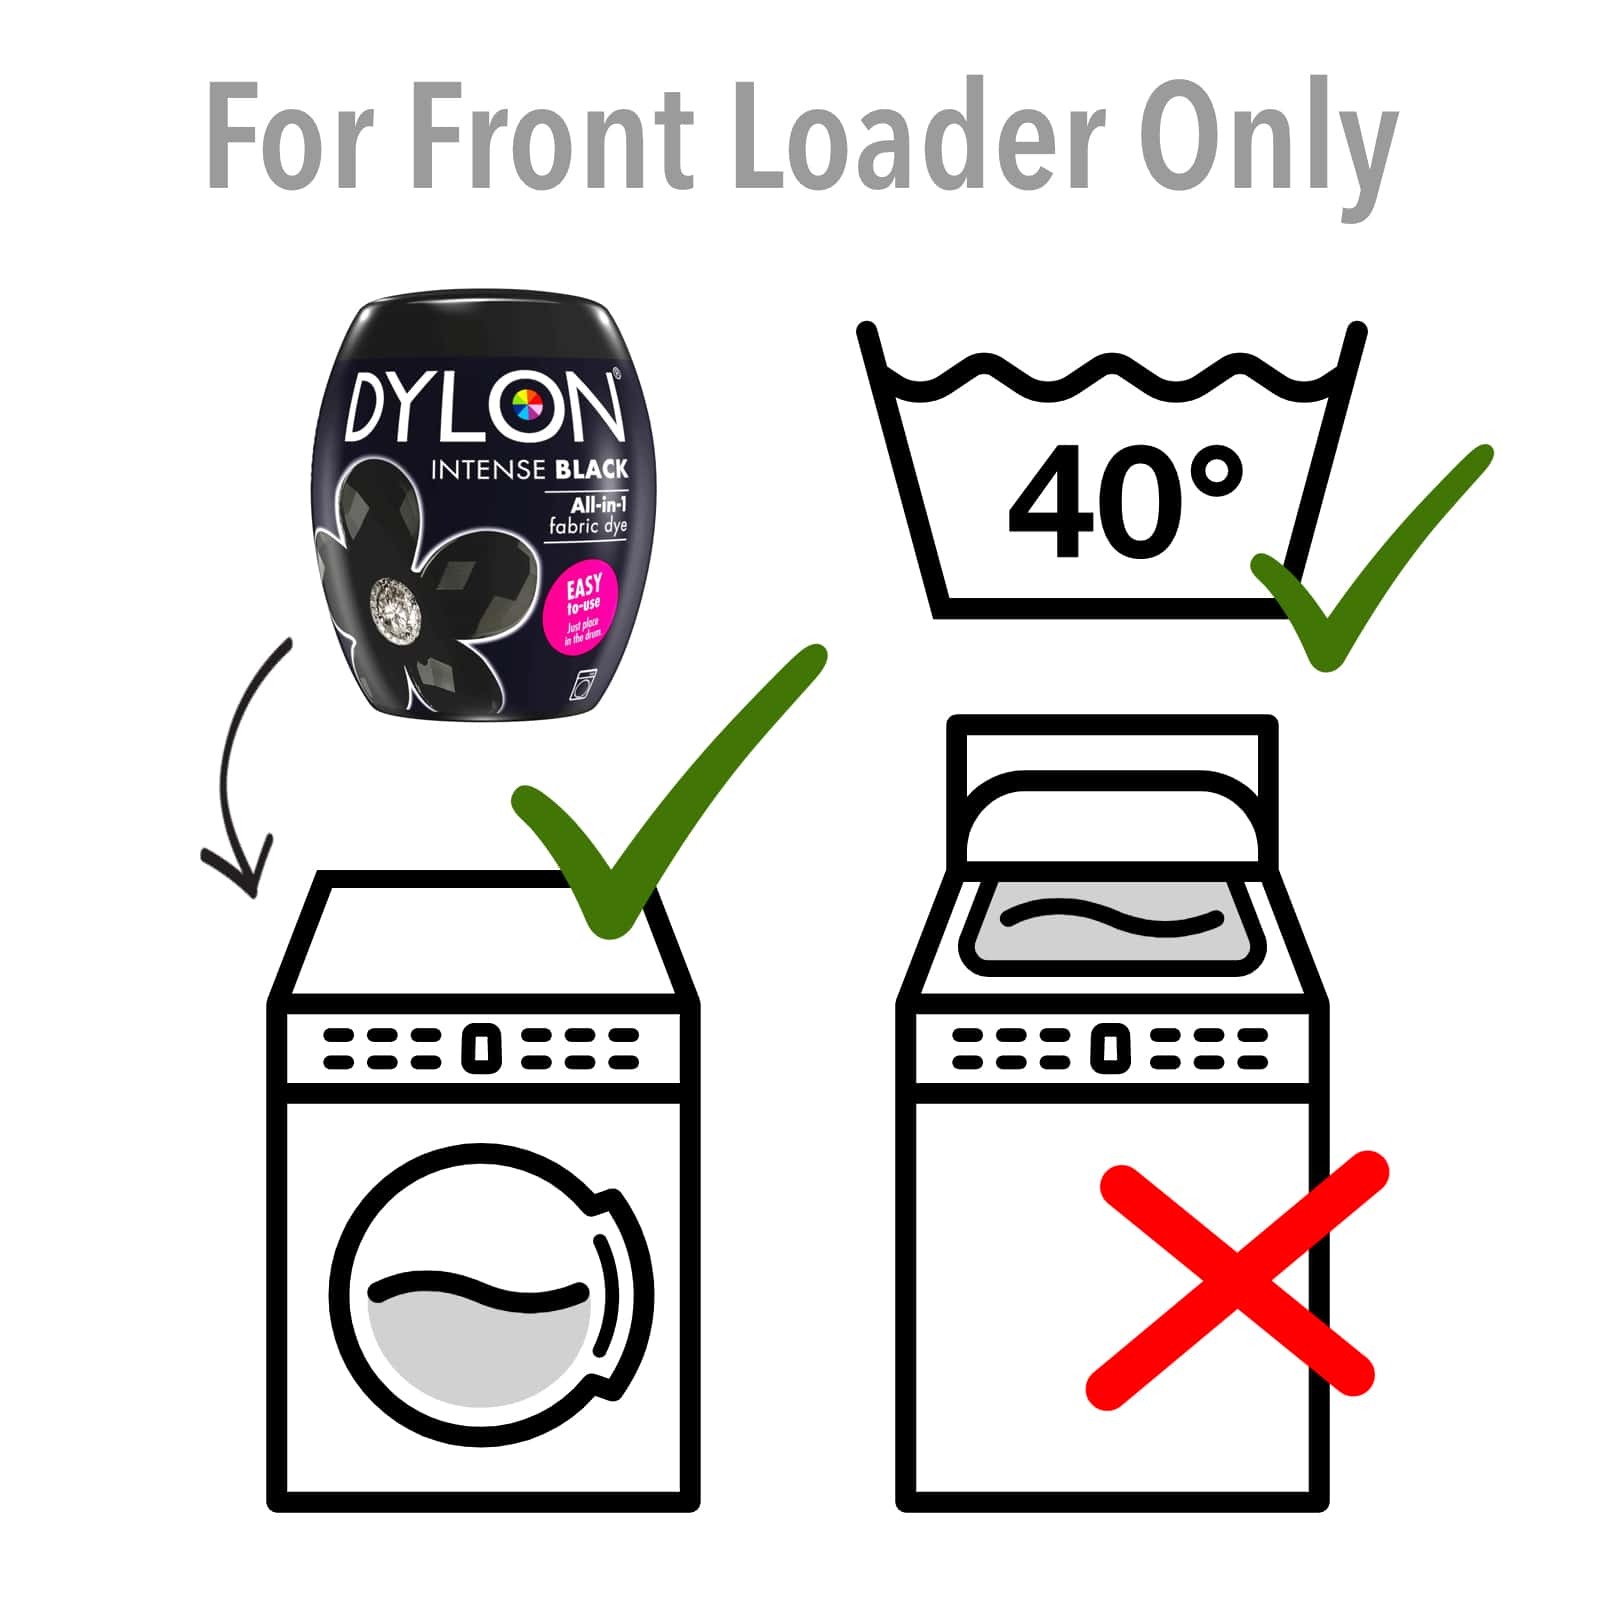 Dylon Machine Dye Pod 350g 12 Intense Black - Wilsons - Import,  distribution and wholesale of branded household, hardware and DIY products